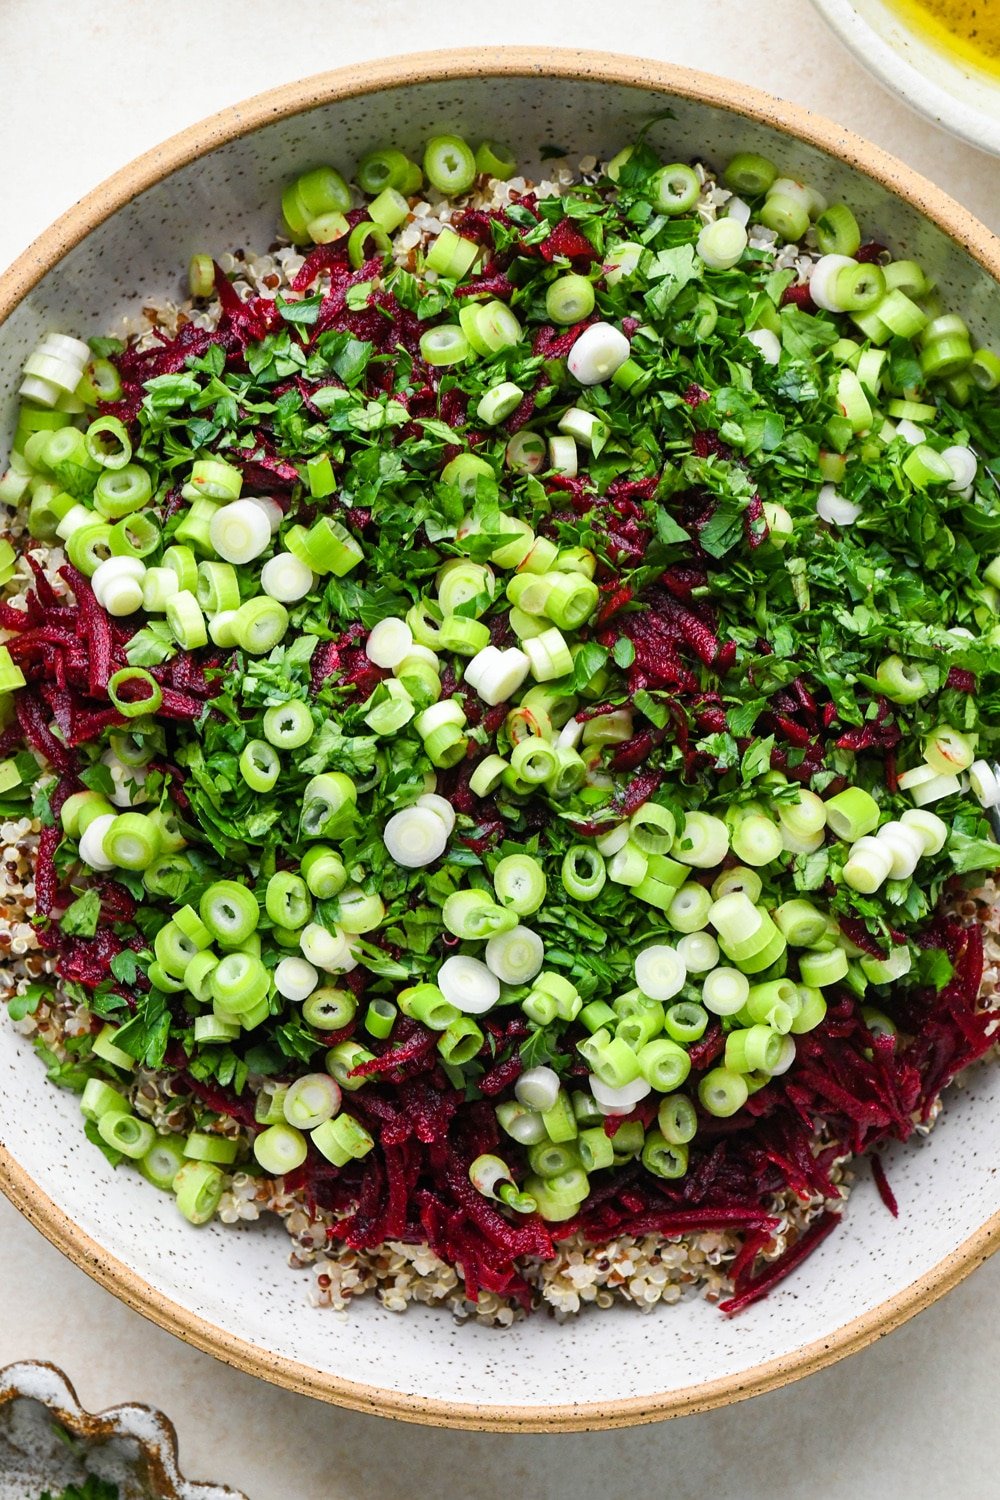 How to make quinoa and fresh beet salad: All ingredients for quinoa salad in a large bowl before mixing together.